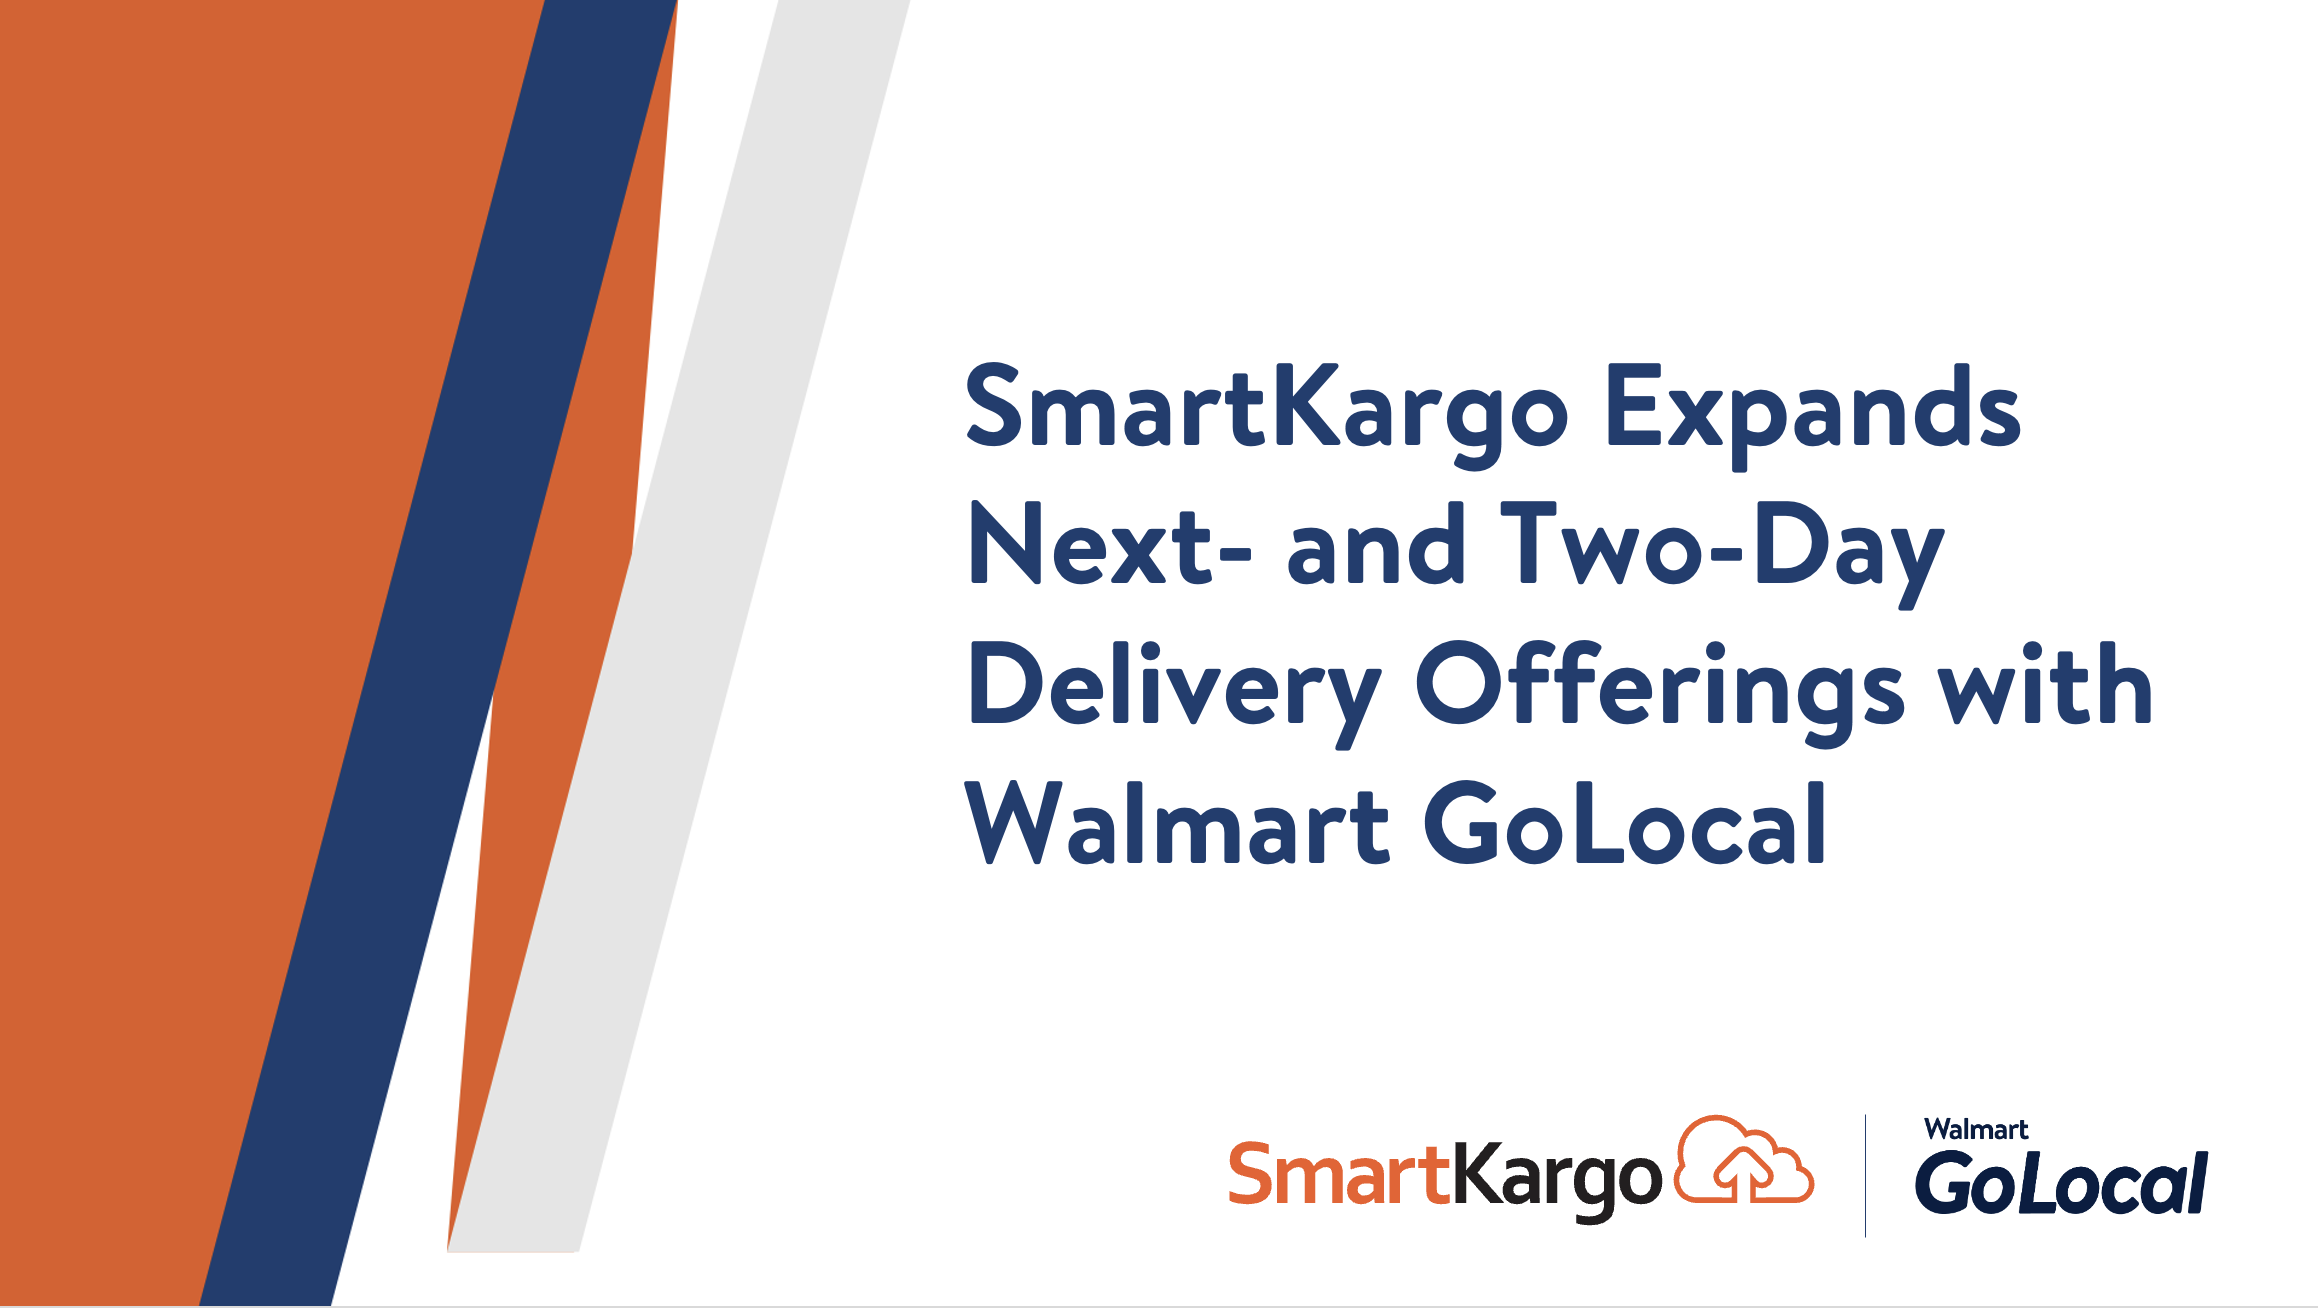 SmartKargo Expands Next- and Two-Day Delivery Offerings with Walmart GoLocal